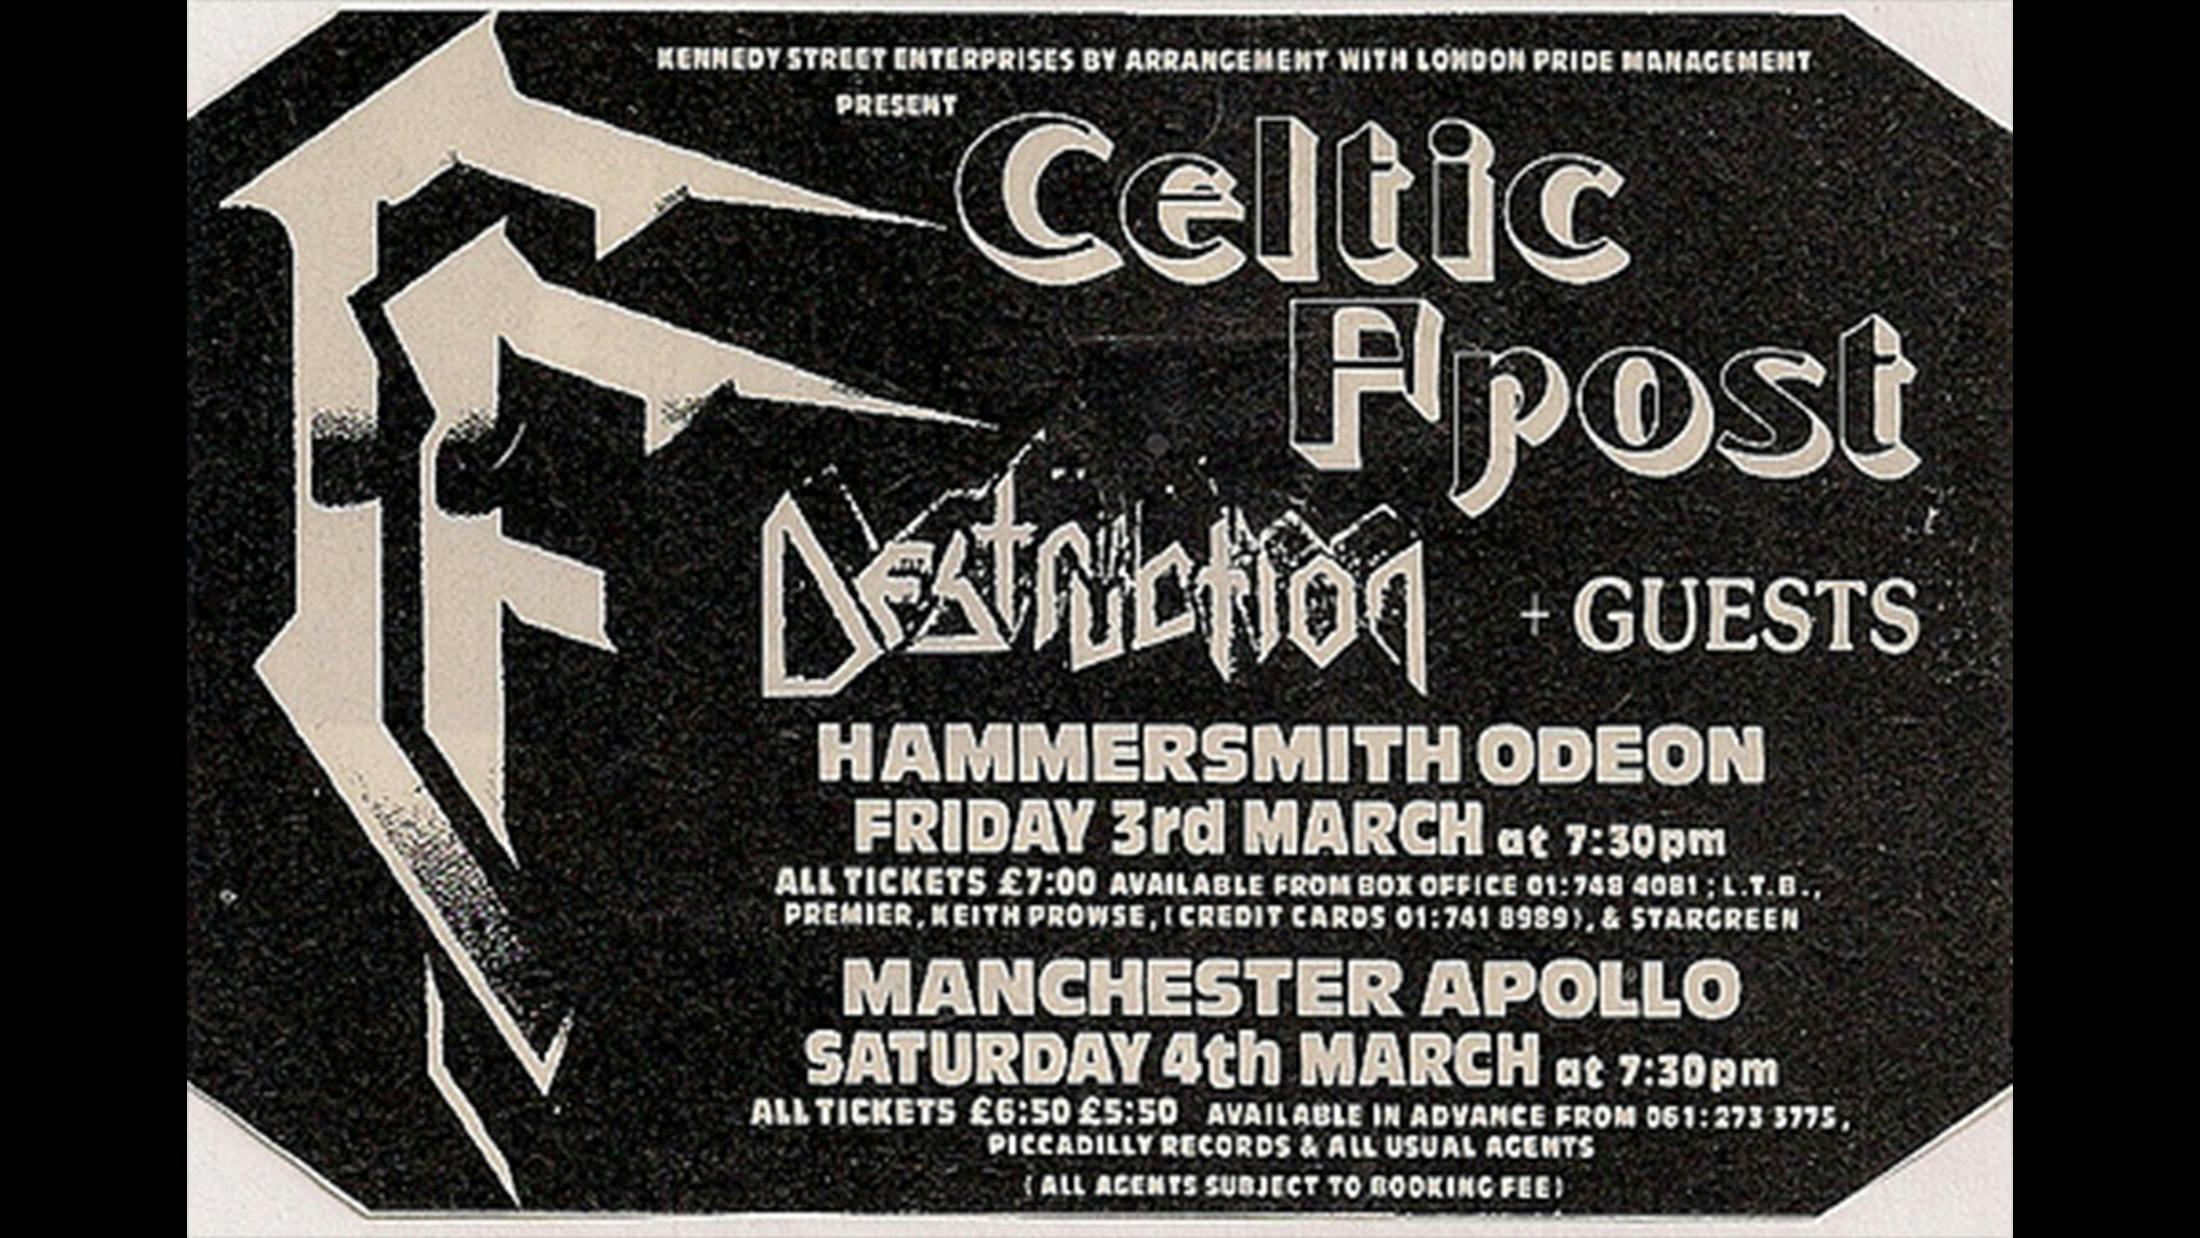 To play HAMMERSMITH was always very special for us. This was our second time after the gig with Motörhead there in ‘87. This tour with Celtic Frost in the UK after their Cold Lake album was a diverse one, because of the different approach of that record. I still have a lot of great memories from that run though – fish and chips were still wrapped in real newspaper as far as I can remember...